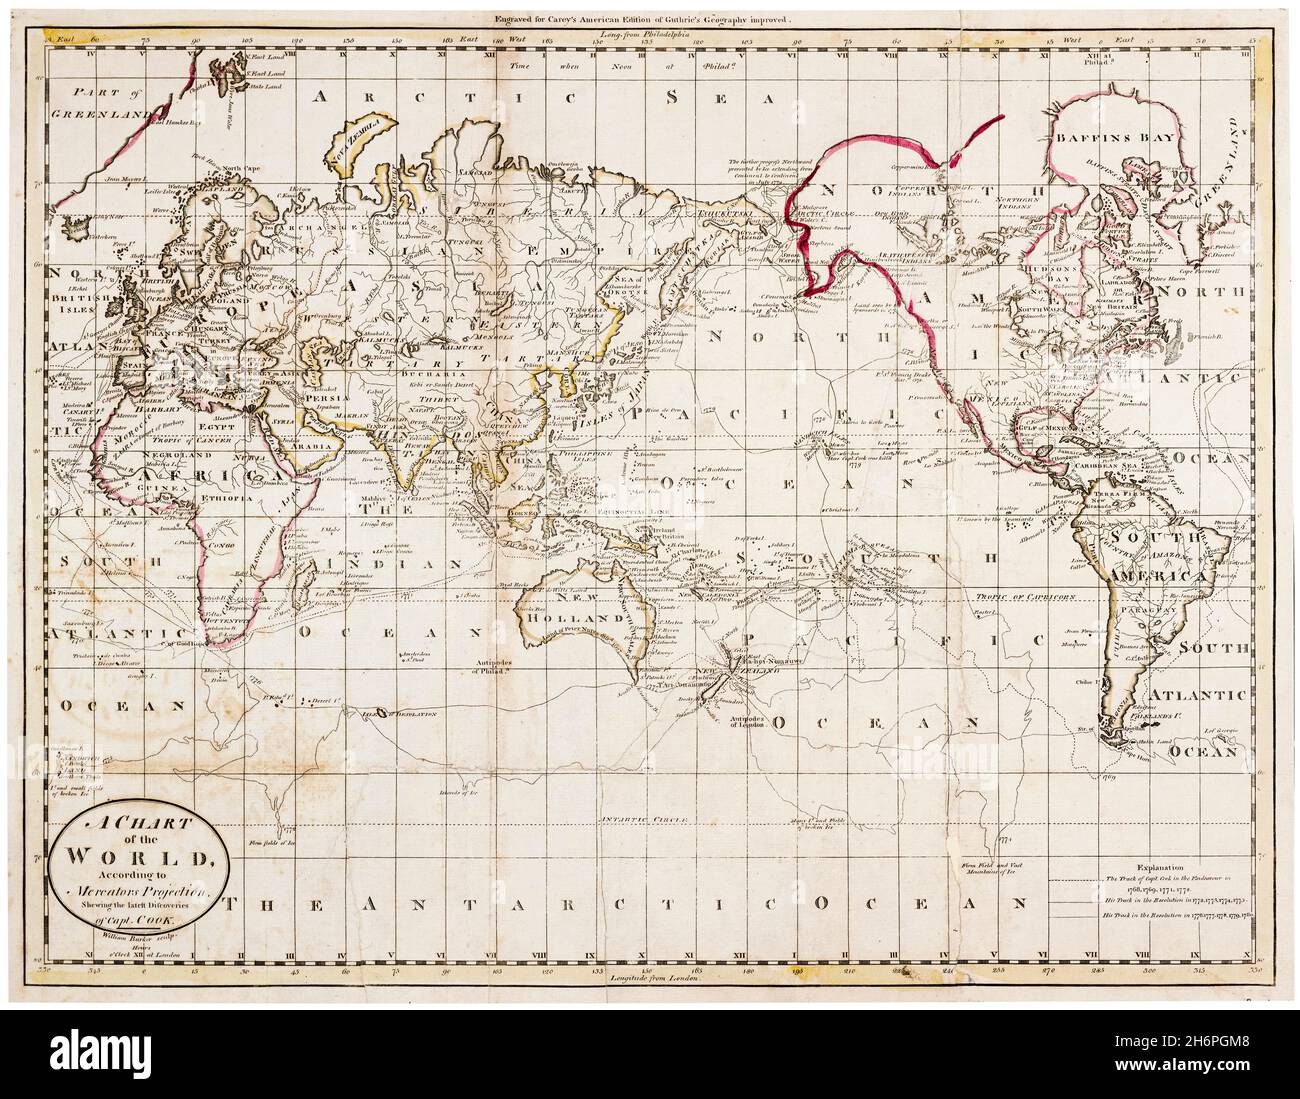 18th Century British World Map, showing the Discoveries of Captain Cook, engraving by William Barker, 1795 Stock Photo